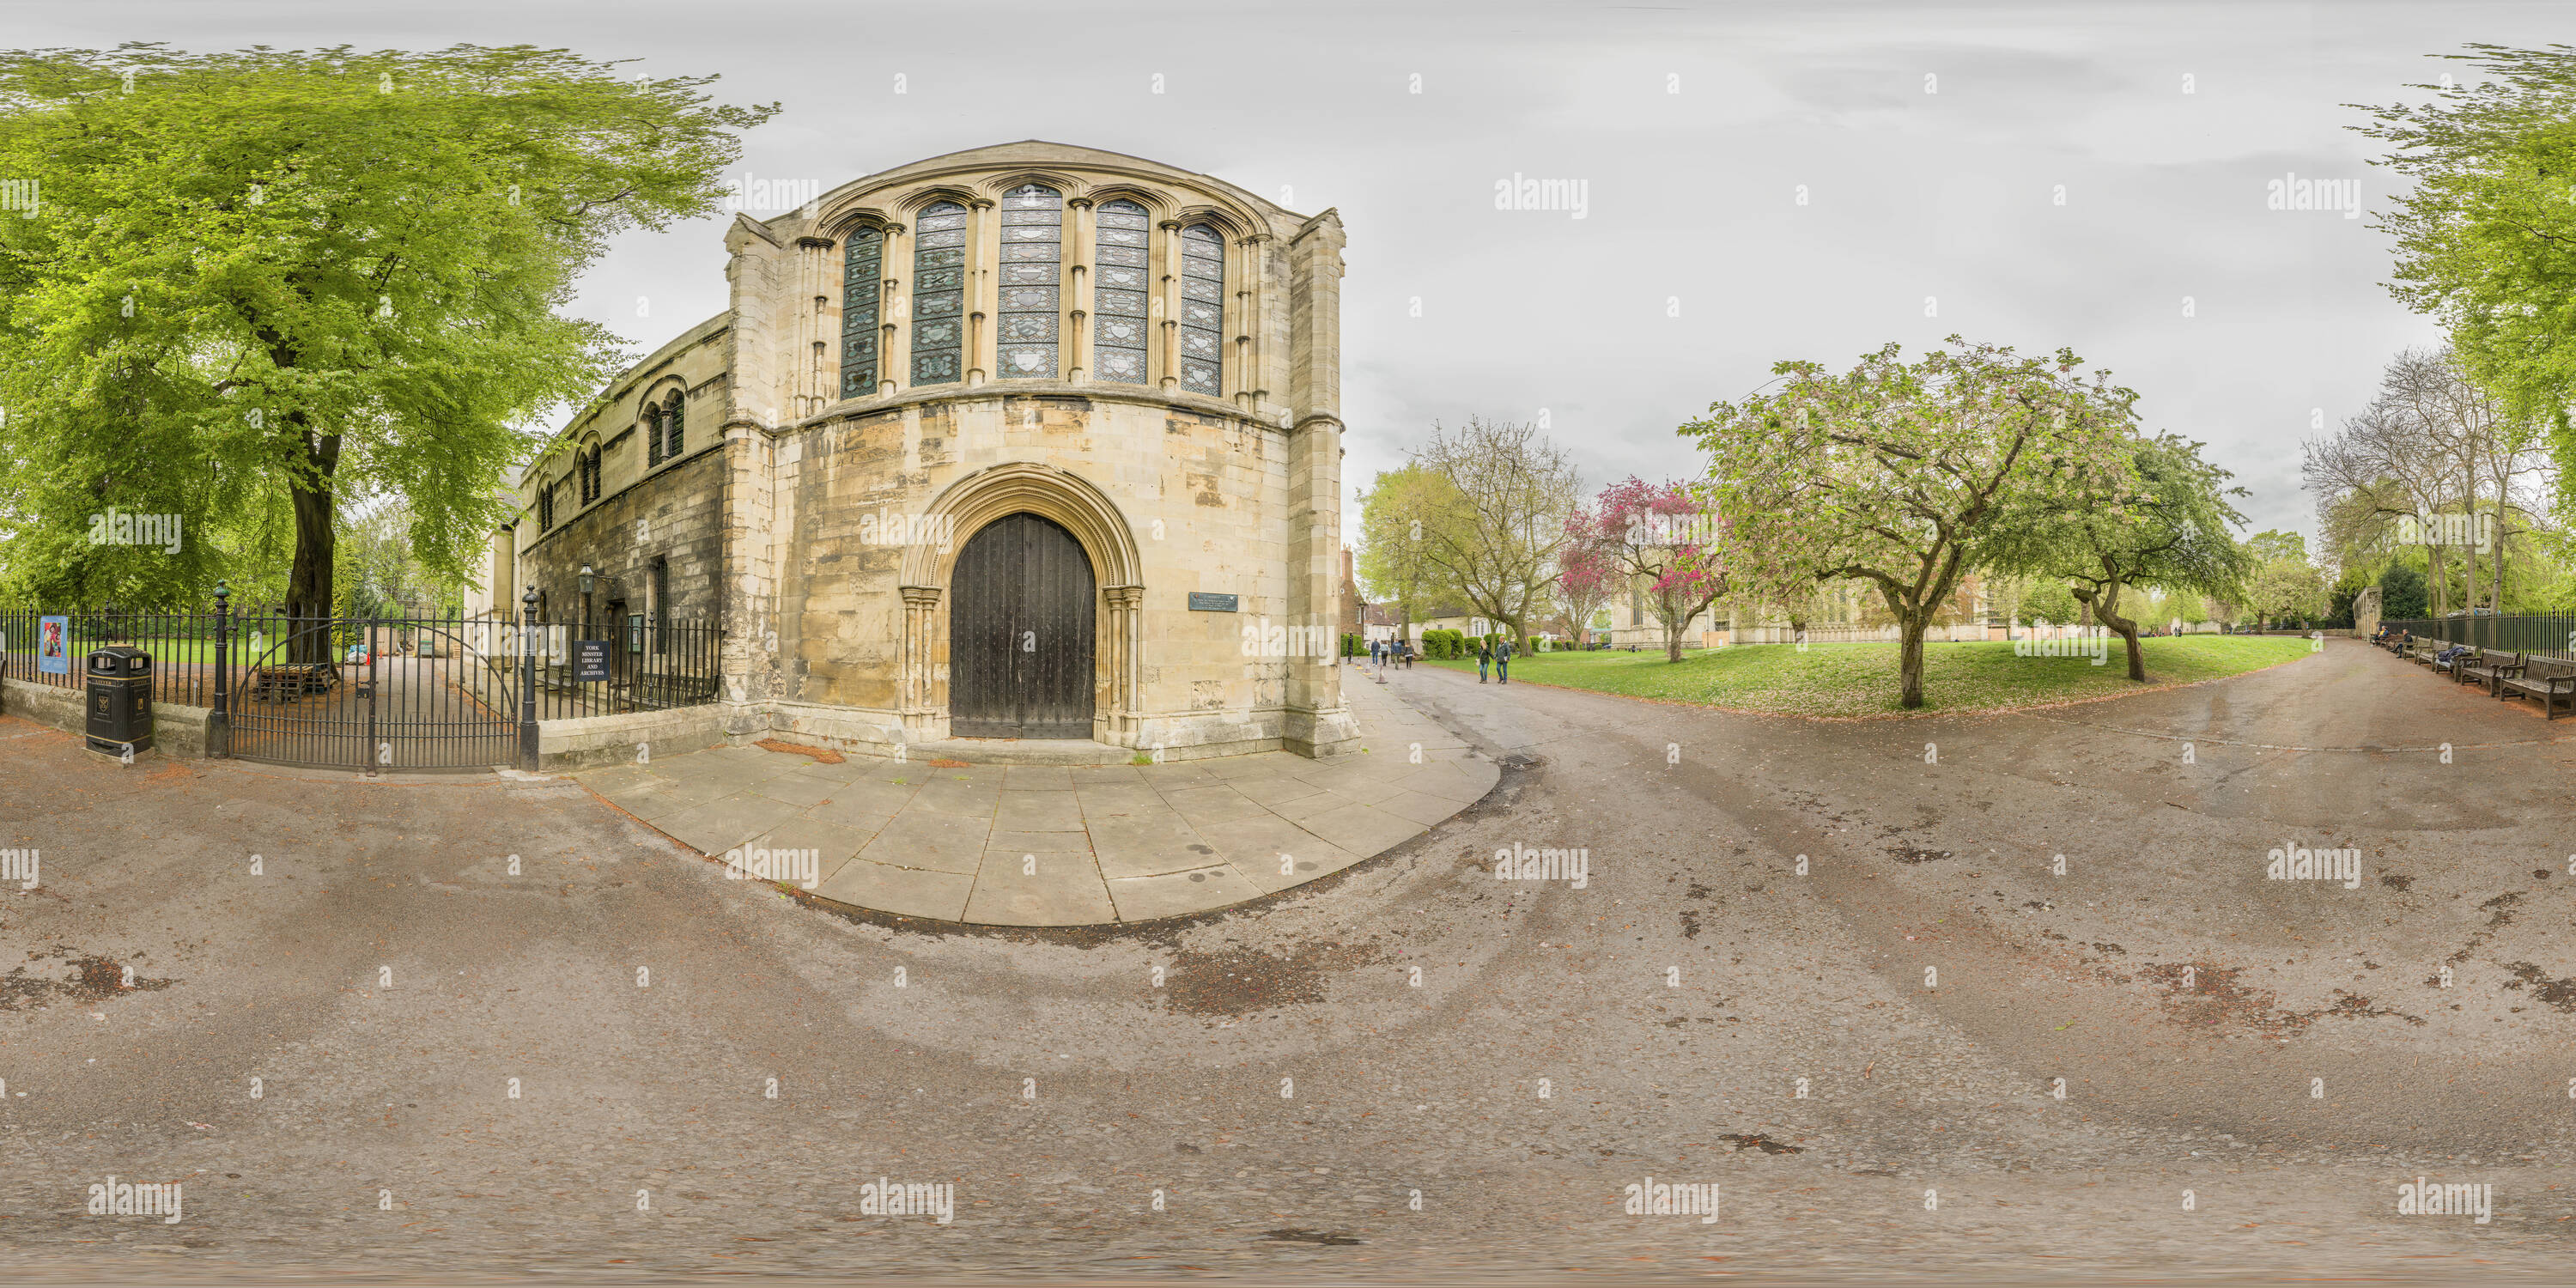 360 degree panoramic view of Old Palace in the grounds of Dean's Park in the precincts of medieval cathedral (minster) at York, England, on an overcast spring day.